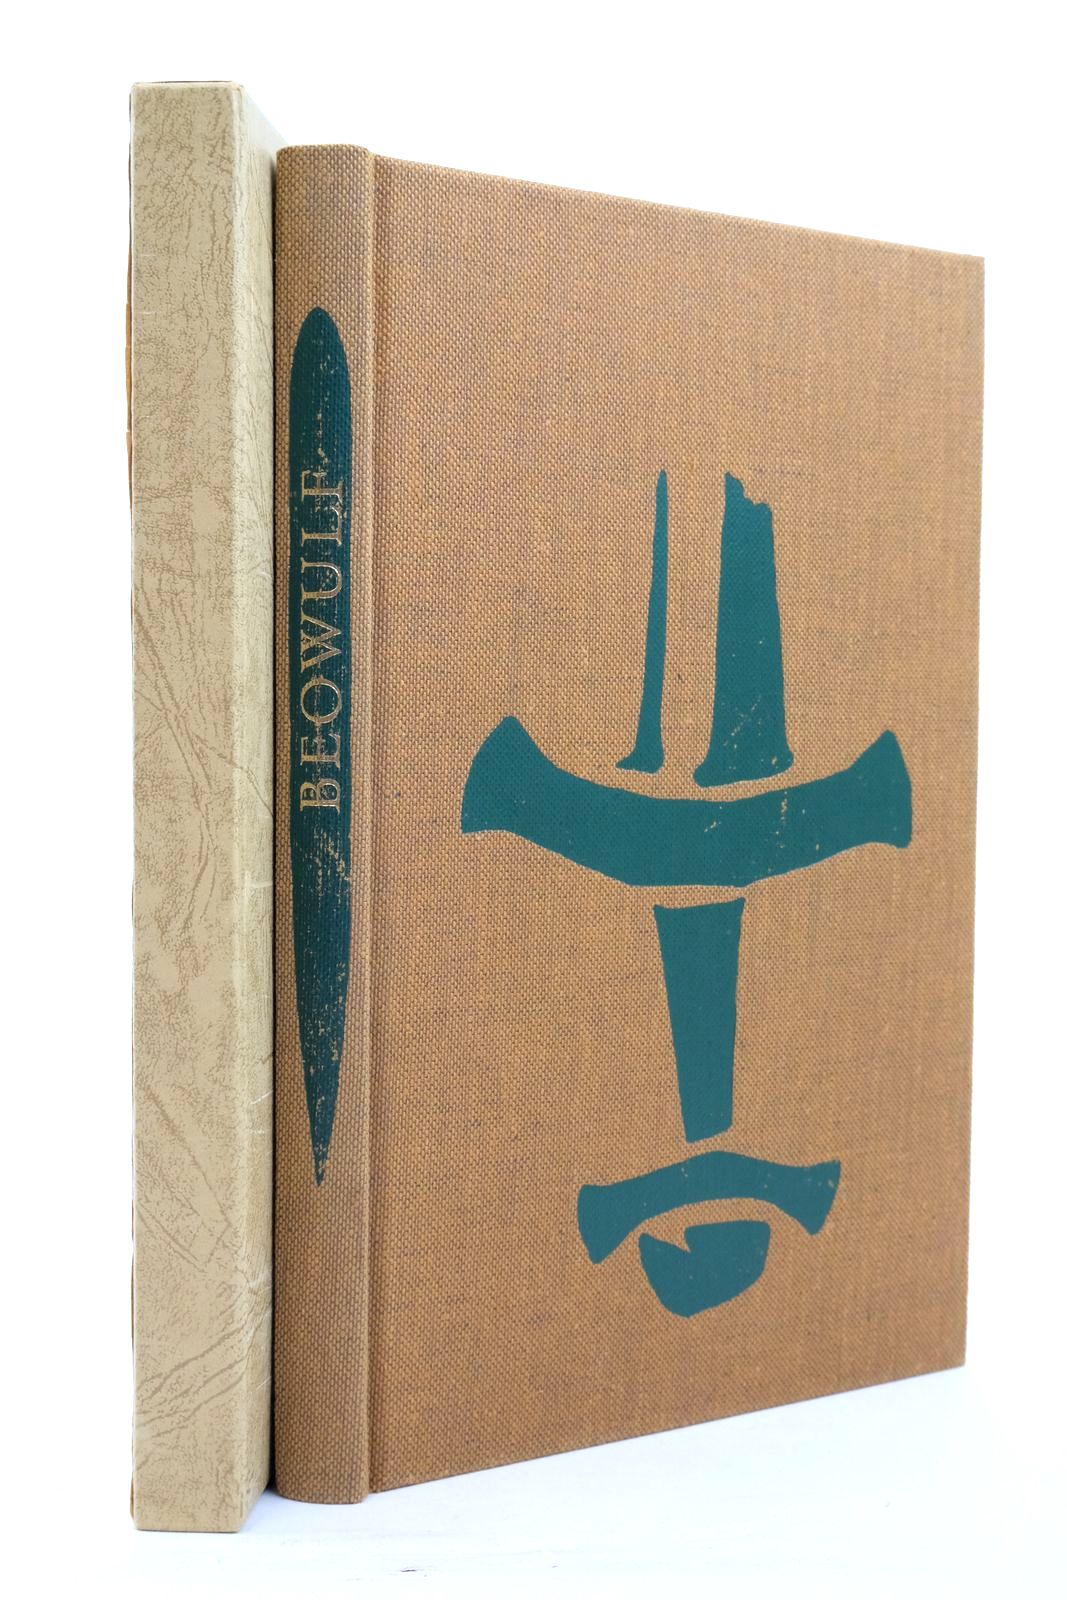 Photo of BEOWULF written by Crossley-Holland, Kevin Mitchell, Bruce illustrated by Burnett, Virgil published by Folio Society (STOCK CODE: 2138181)  for sale by Stella & Rose's Books